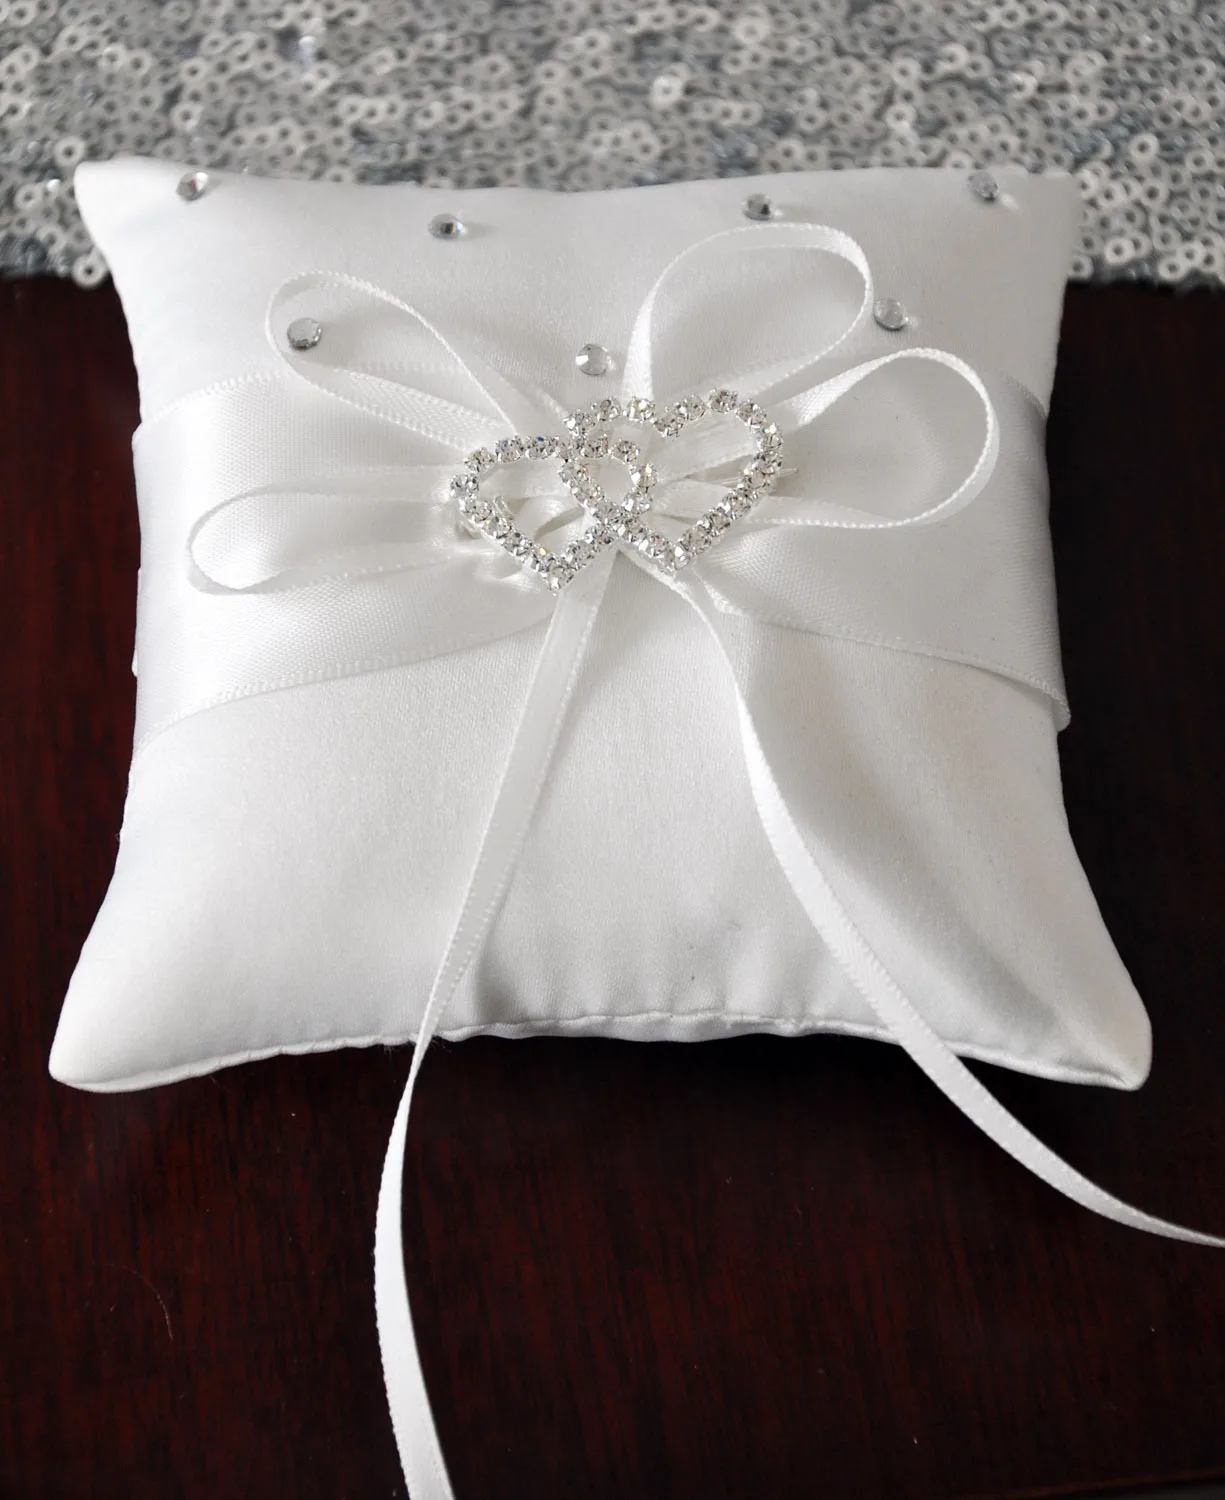 

20CM Lovely Ring Pillow Flower Buds Faux Pearls Decor Bridal Wedding Ceremony Pocket Ring Pillow Cushion Bearer with Ribbons